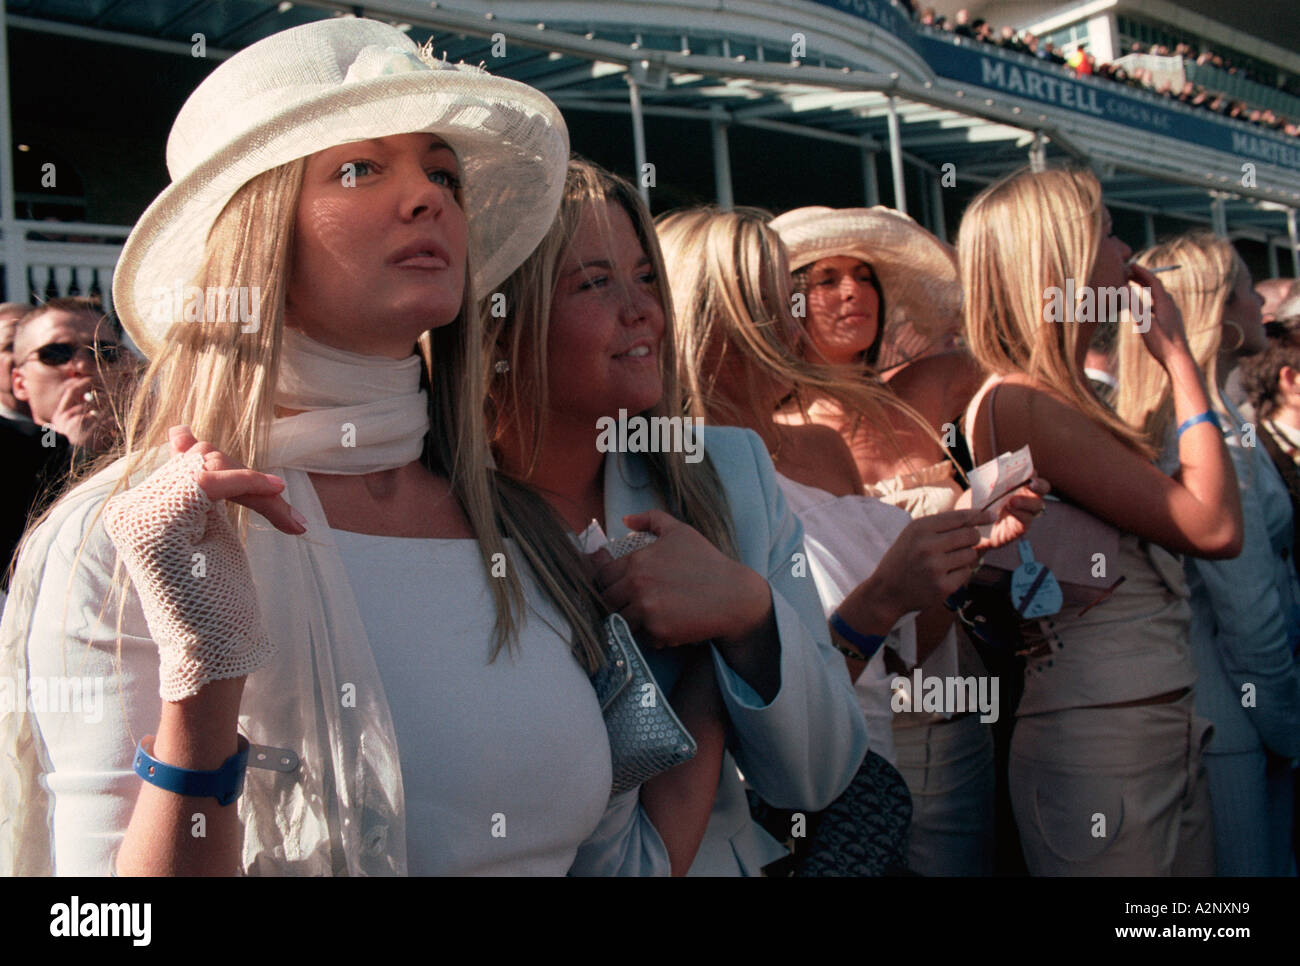 Aintree Racecourse, Liverpool UK.  Young women look on excitedly as the Grand National horse race draws to a close Stock Photo